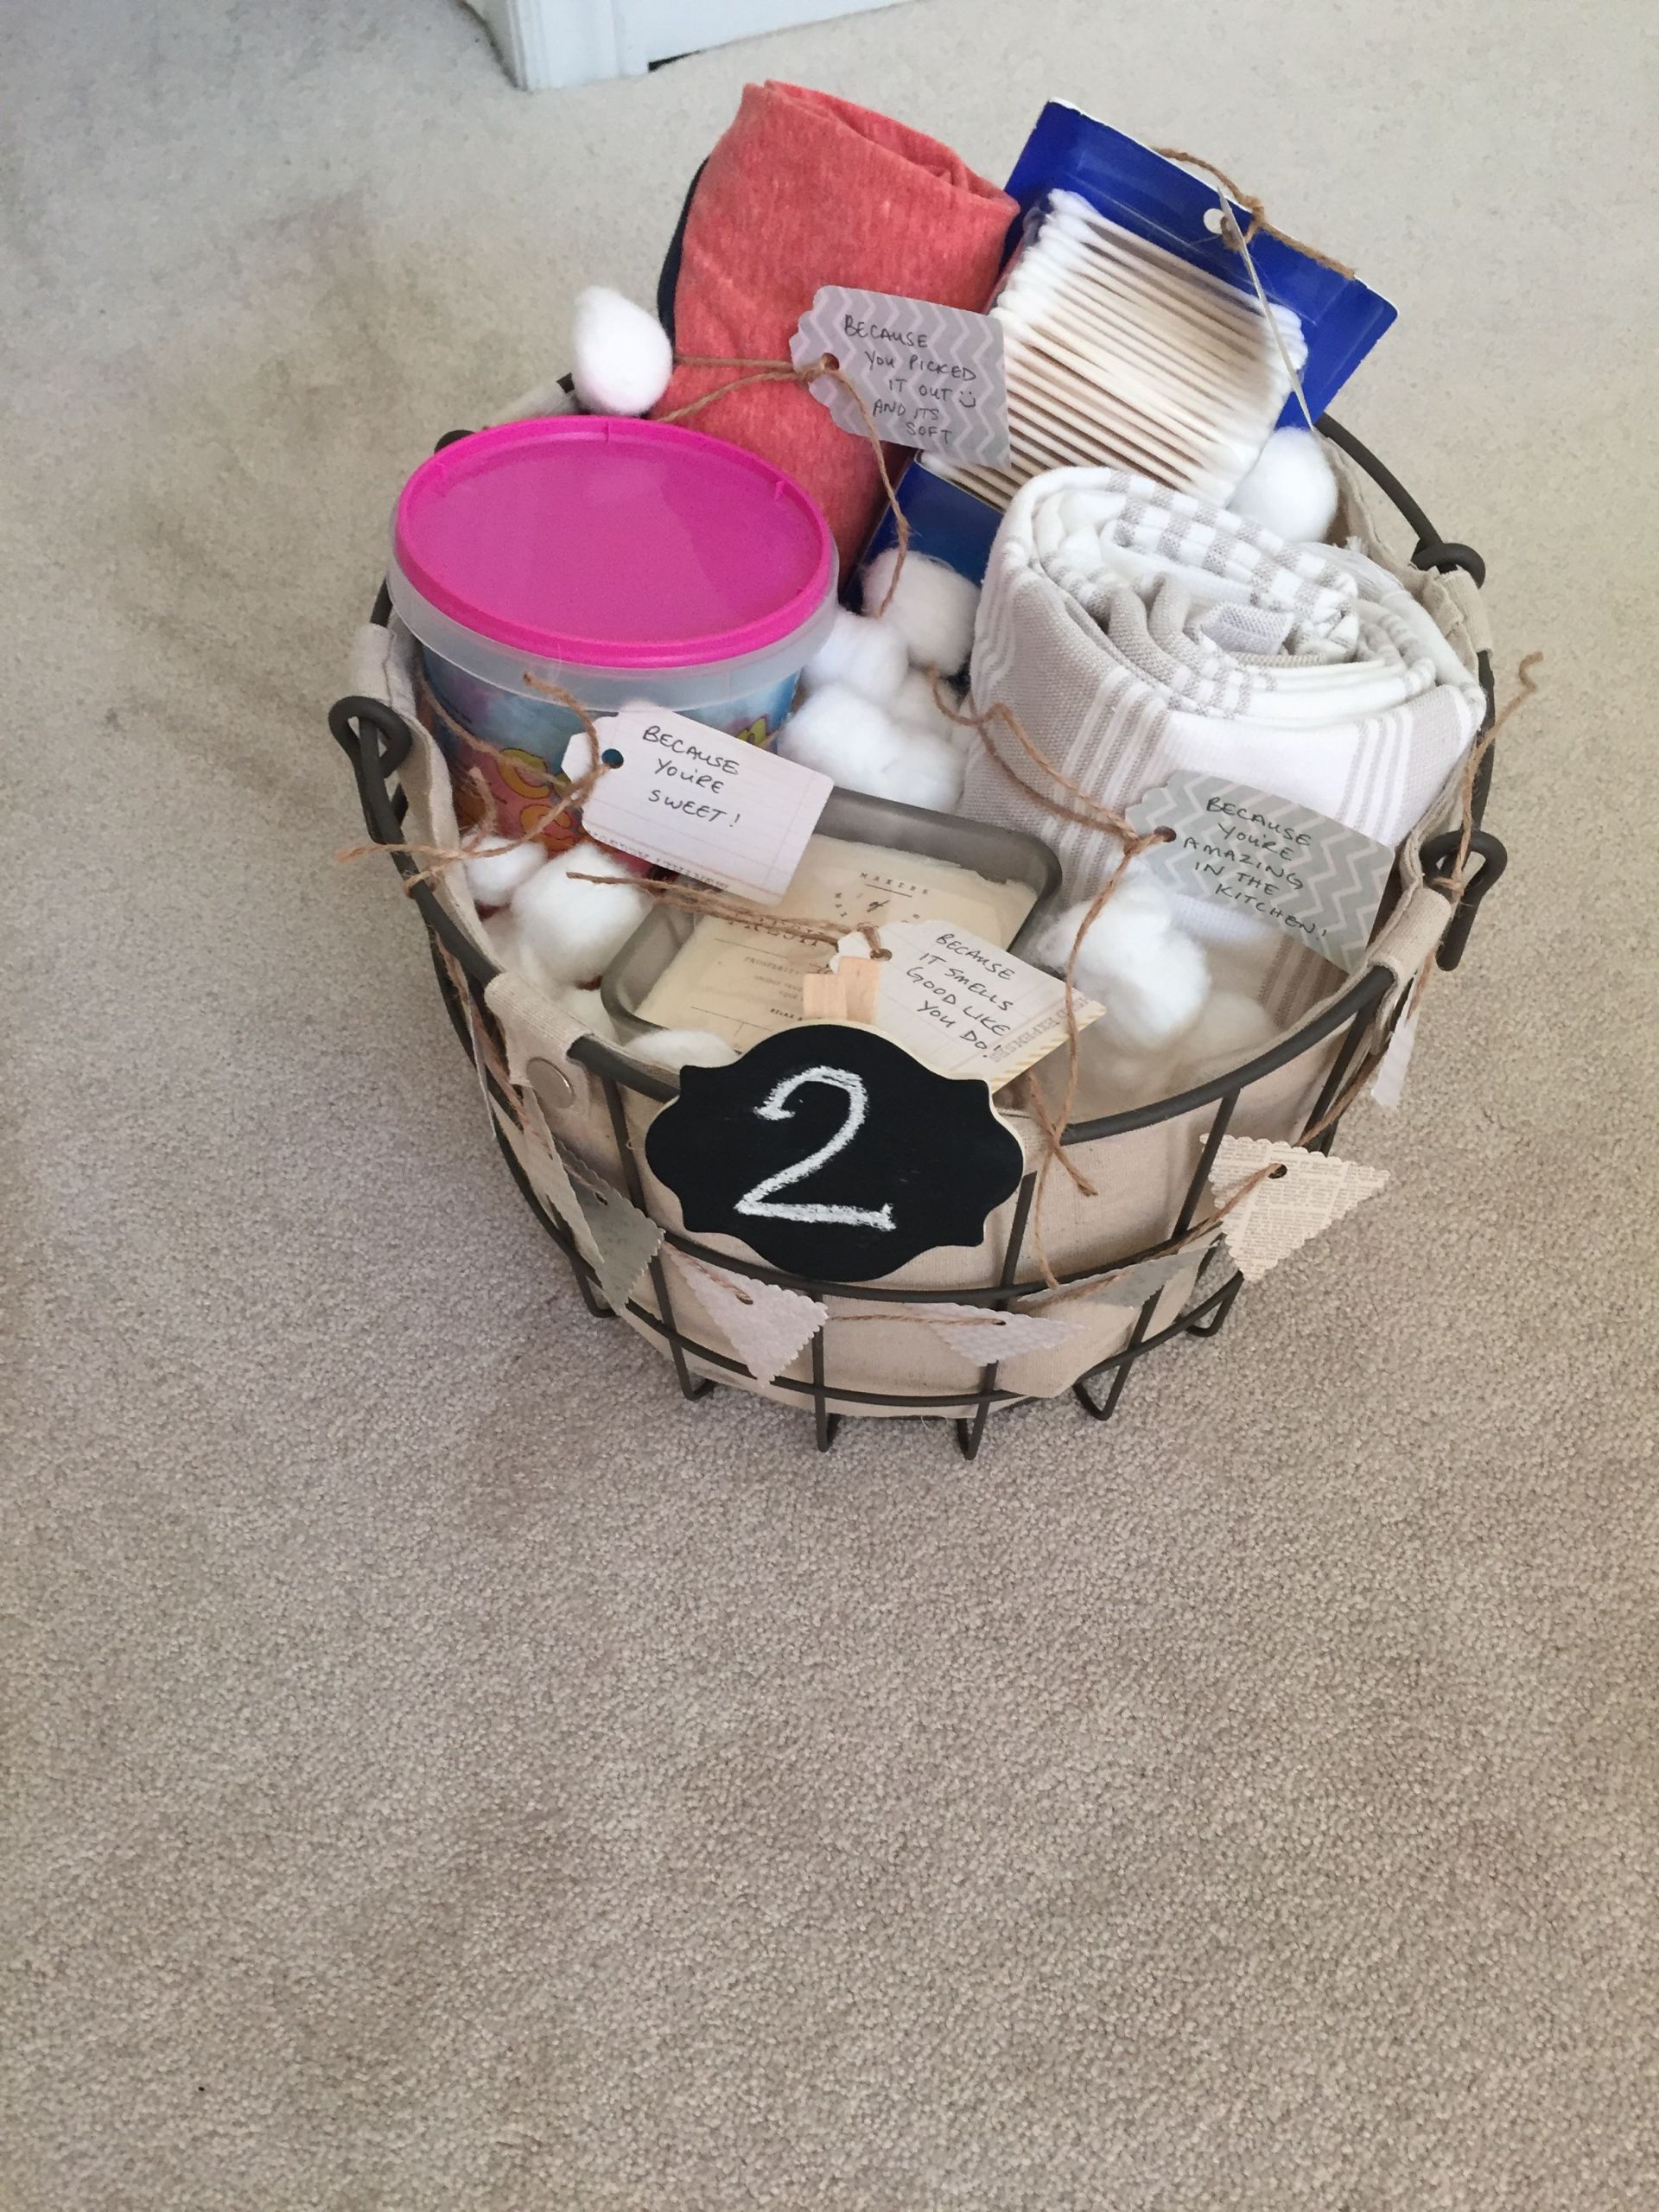 Cotton Anniversary Gift Ideas For Him
 2nd Wedding Anniversary Cotton Themed Gift Basket